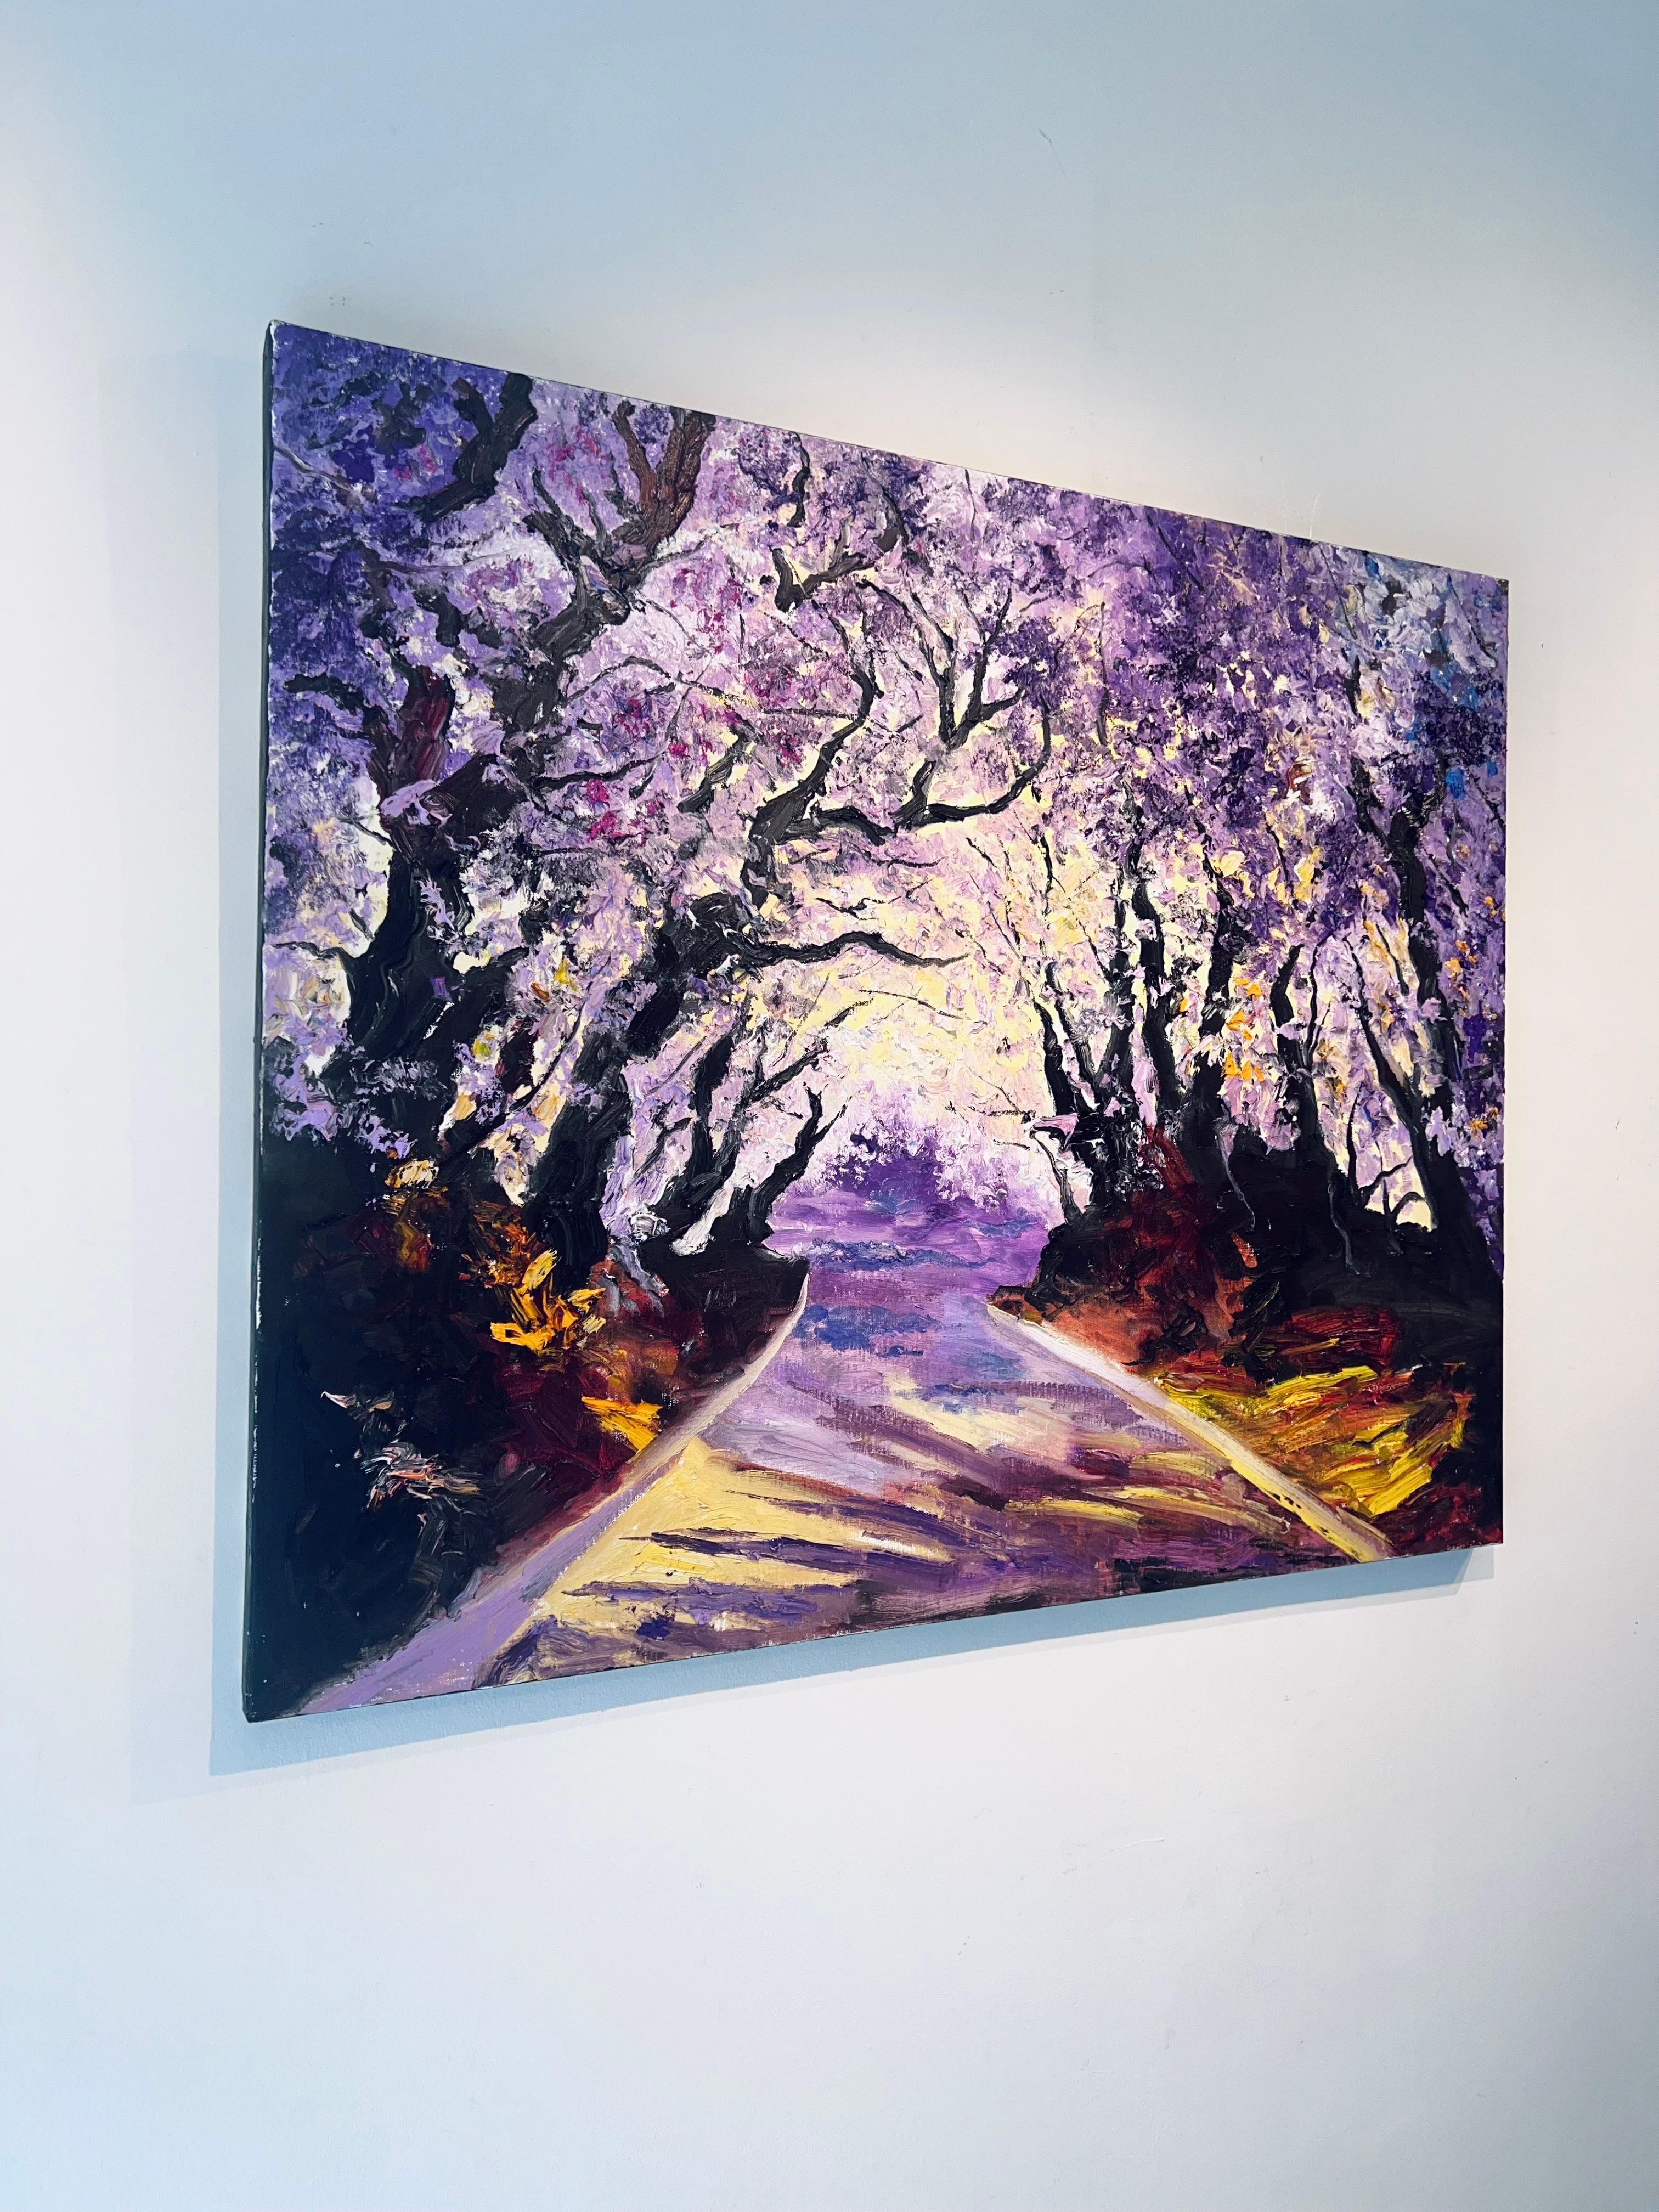 Violet Path - Original impressionism landscape oil painting - contemporary Art - Abstract Impressionist Painting by Denis Ribas 